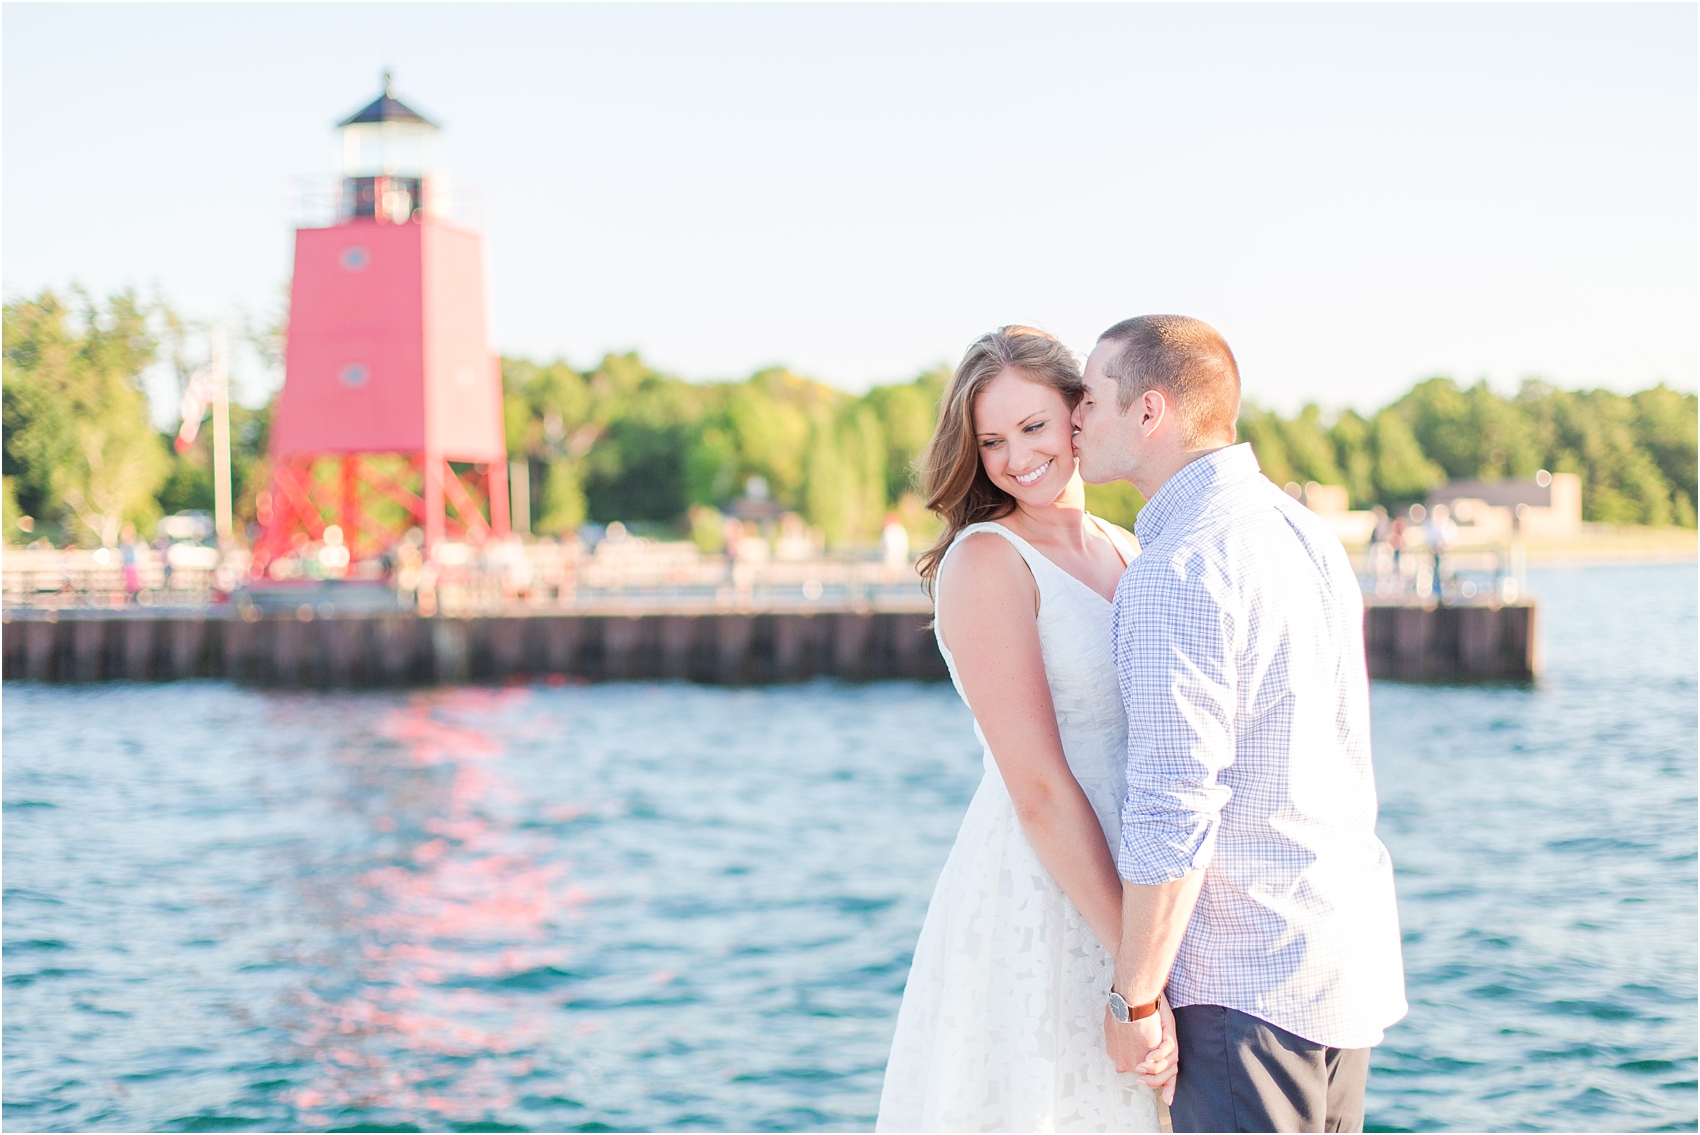 romantic-sunset-engagement-photos-at-the-lighthouse-in-charlevoix-mi-by-courtney-carolyn-photography_0016.jpg